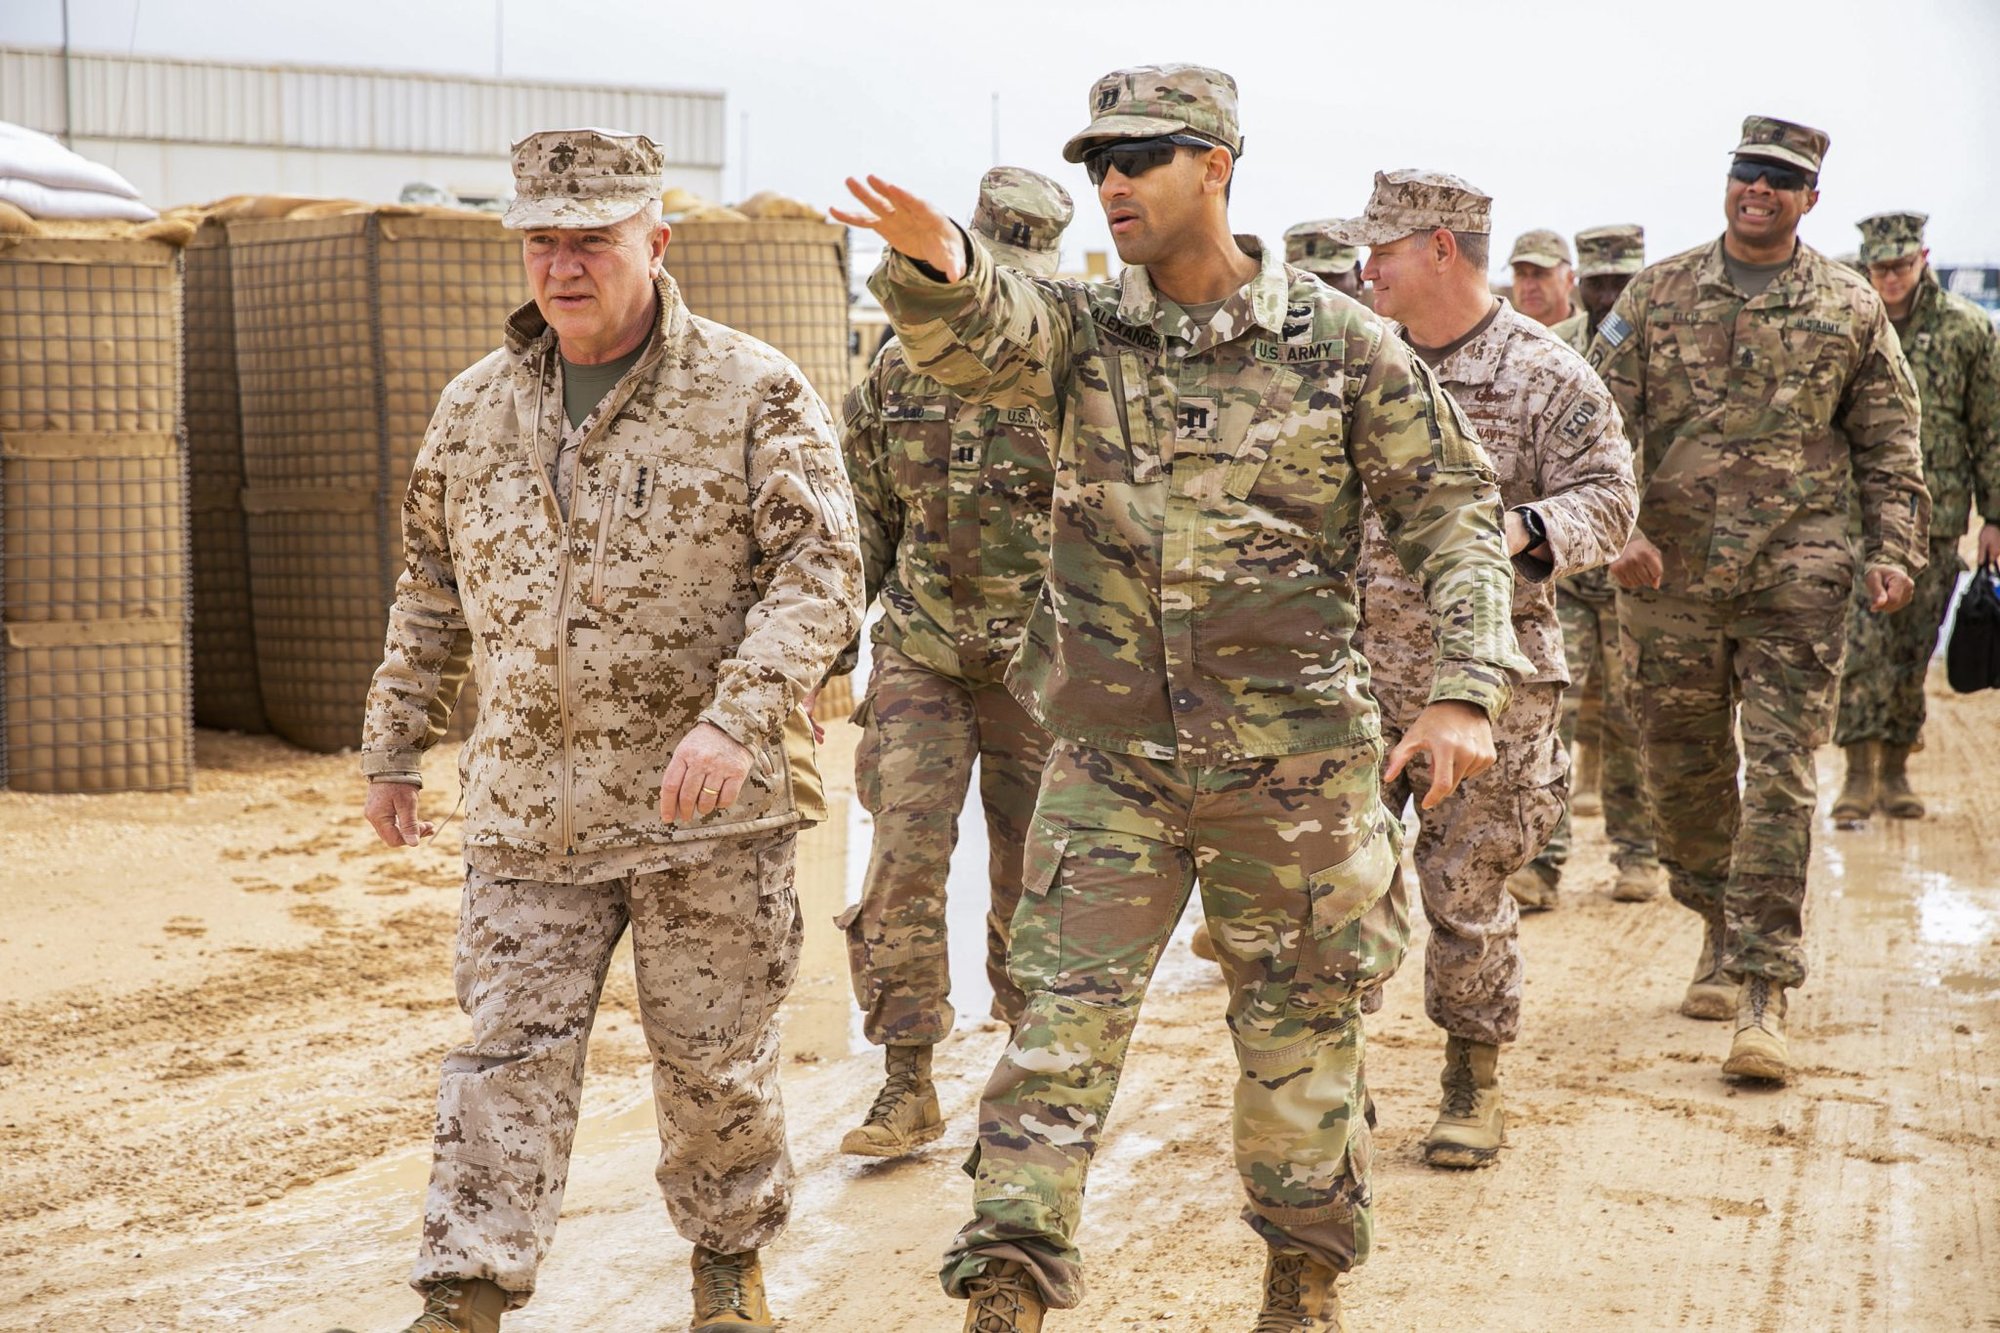 U.S. Marine Corps Gen. Kenneth F. McKenzie Jr., the commander of U.S. Central Command (USCENTCOM), left, walks with Soldiers assigned to 3rd Battalion, 4th Air Defense Artillery Regiment, Jan. 24, 2020. McKenzie visited the USCENTCOM Area of Responsibility to discuss security and stability in the region with forward deployed service members. (U.S. Marine Corps photo by Sgt. Roderick Jacquote)